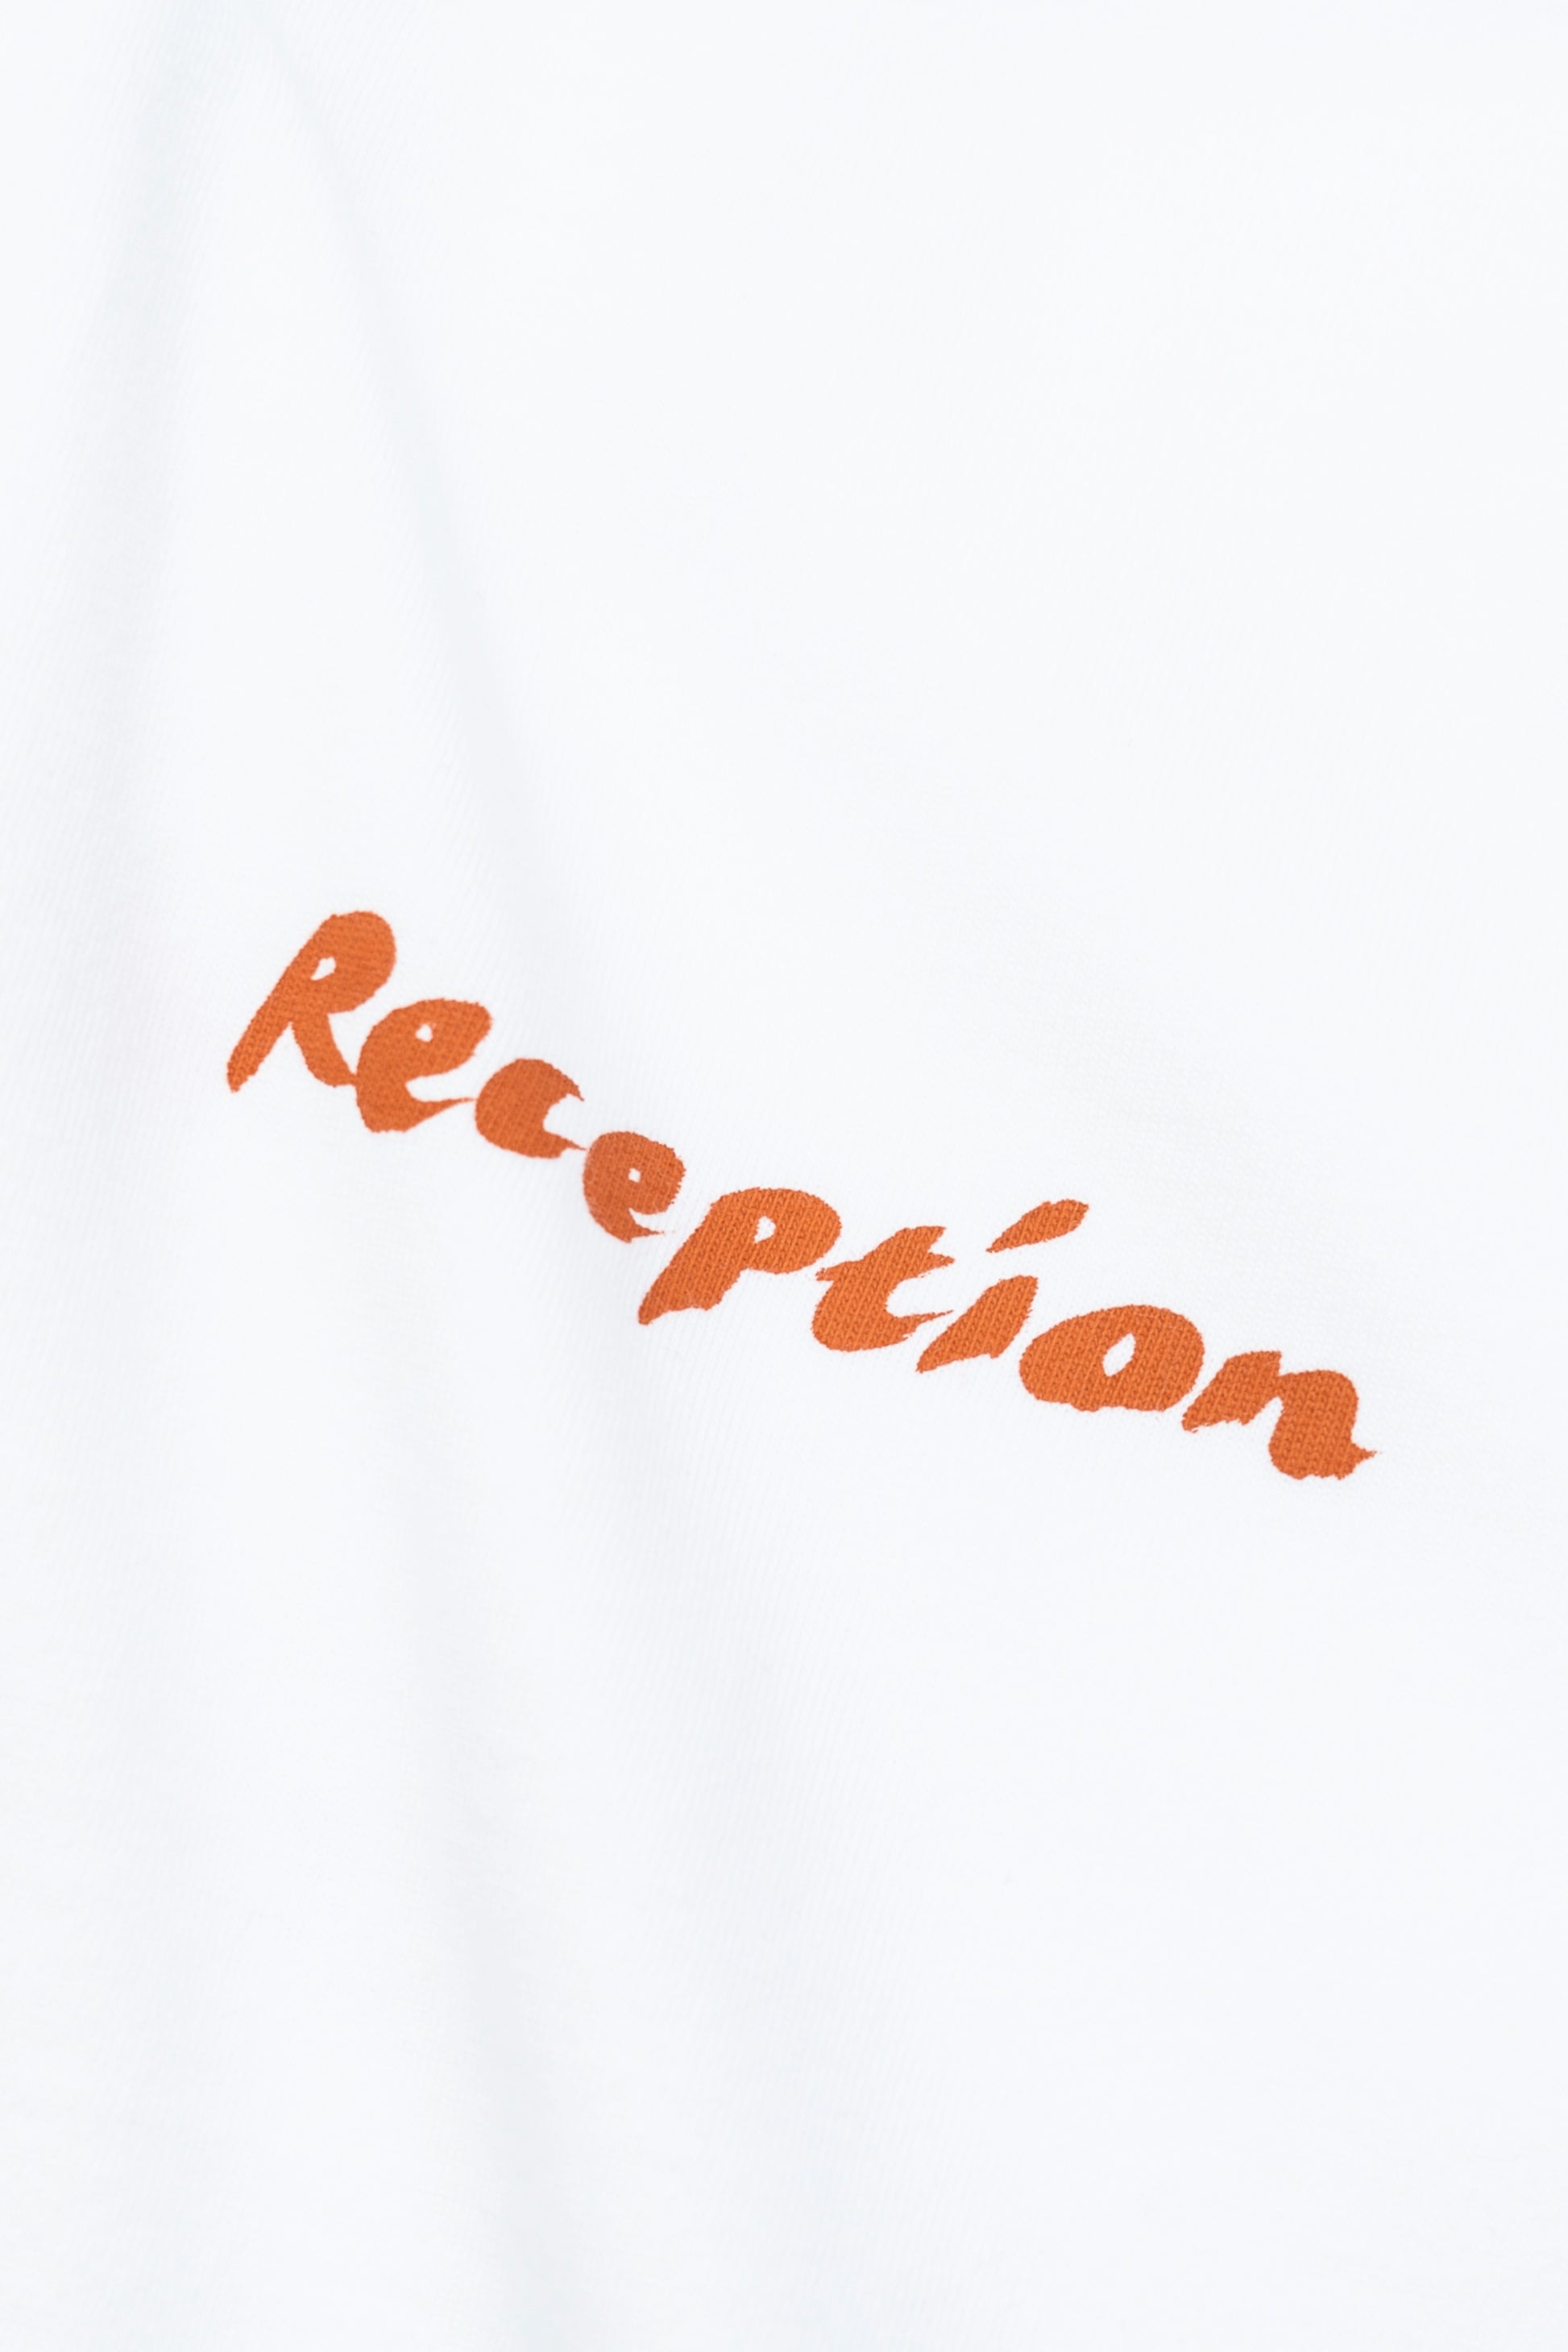 Reception - SS Tee Food (White)